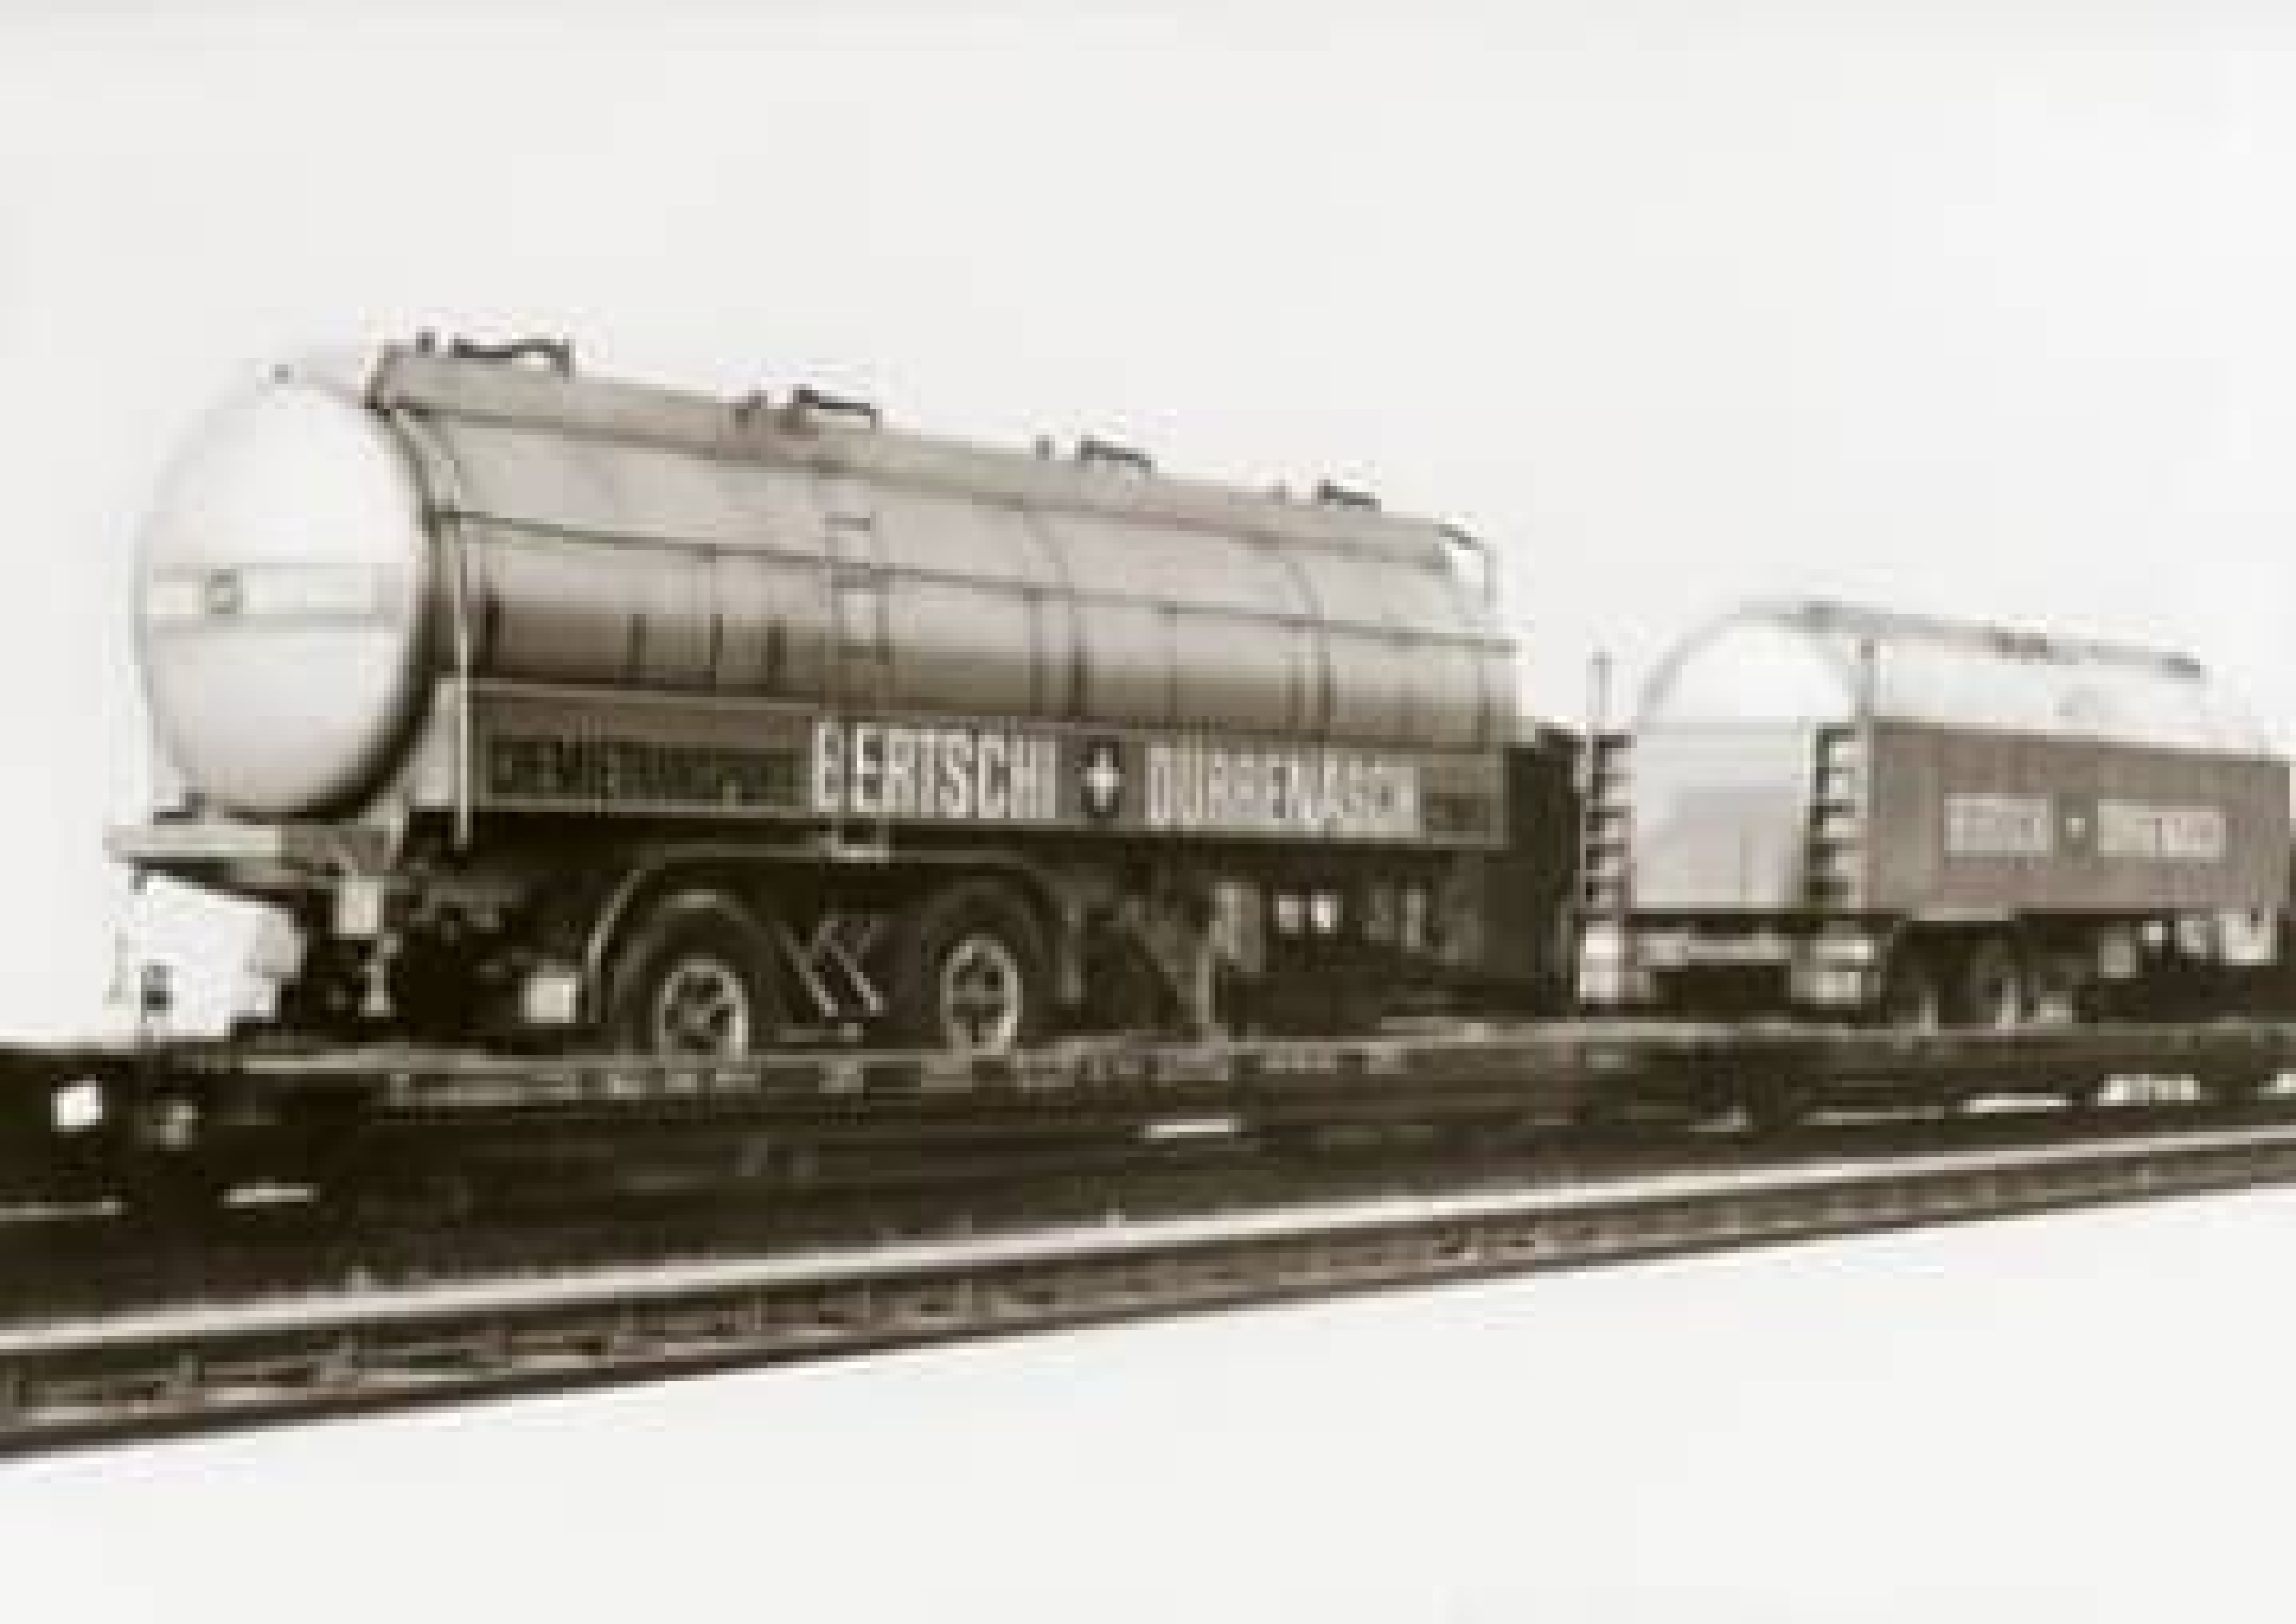 A black and white image of several Bertschi tanking trailers loaded onto railway carts at the newly founded HUPAC terminal.